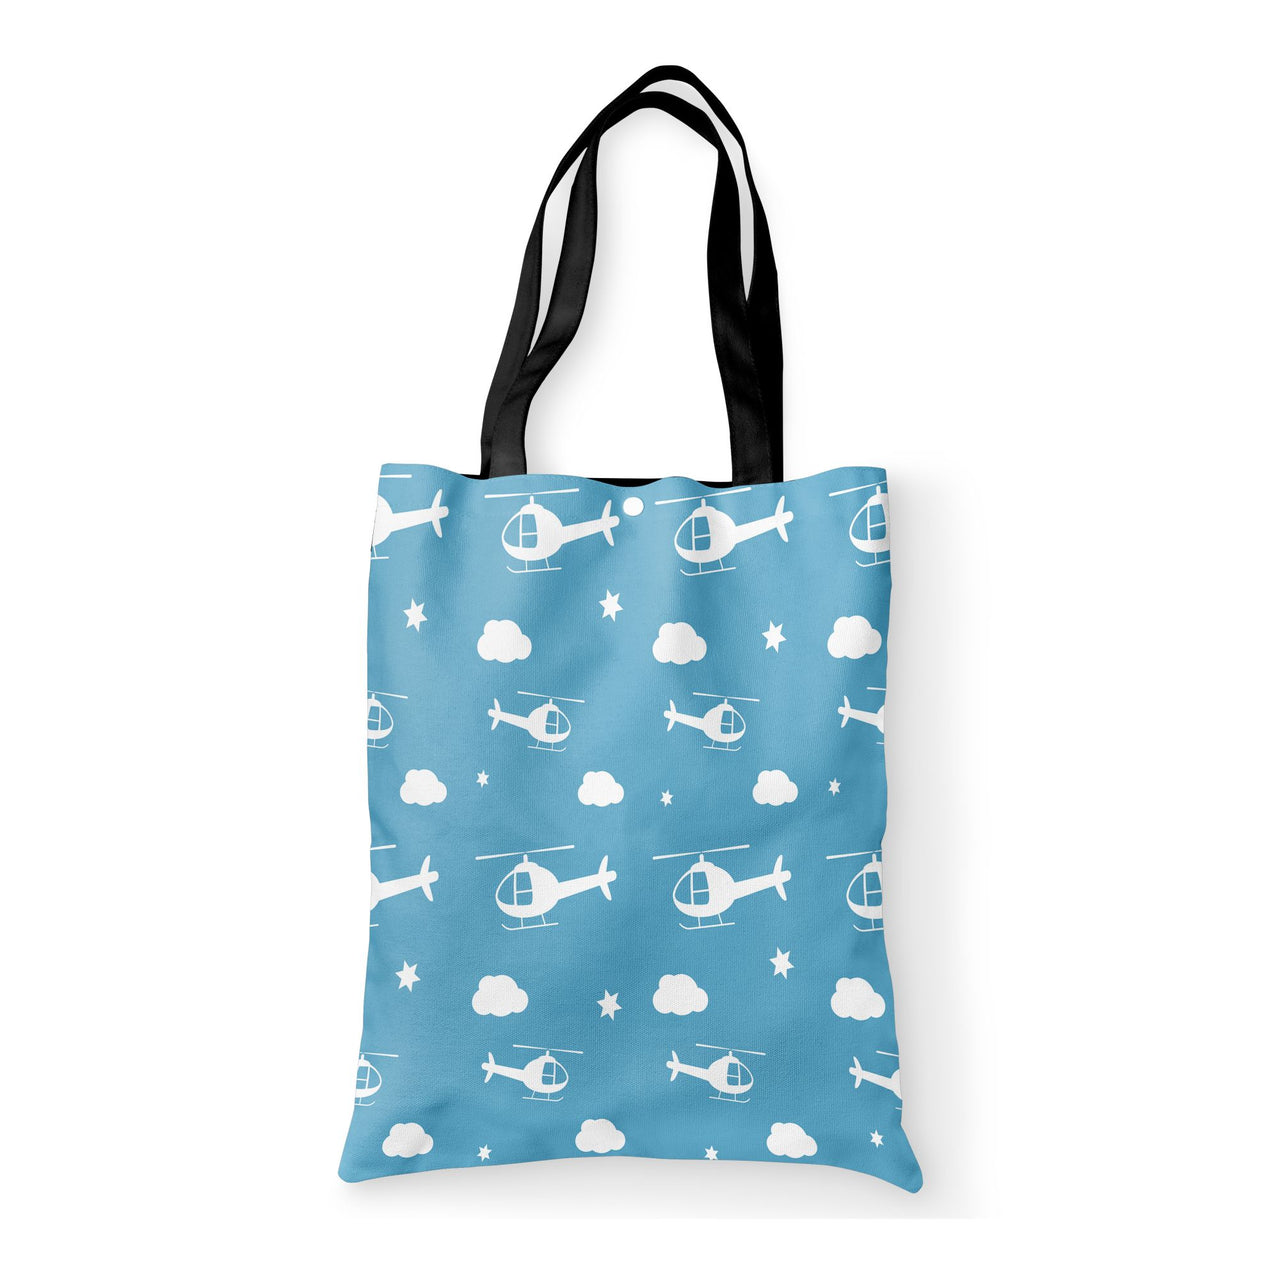 Helicopters & Clouds Designed Tote Bags